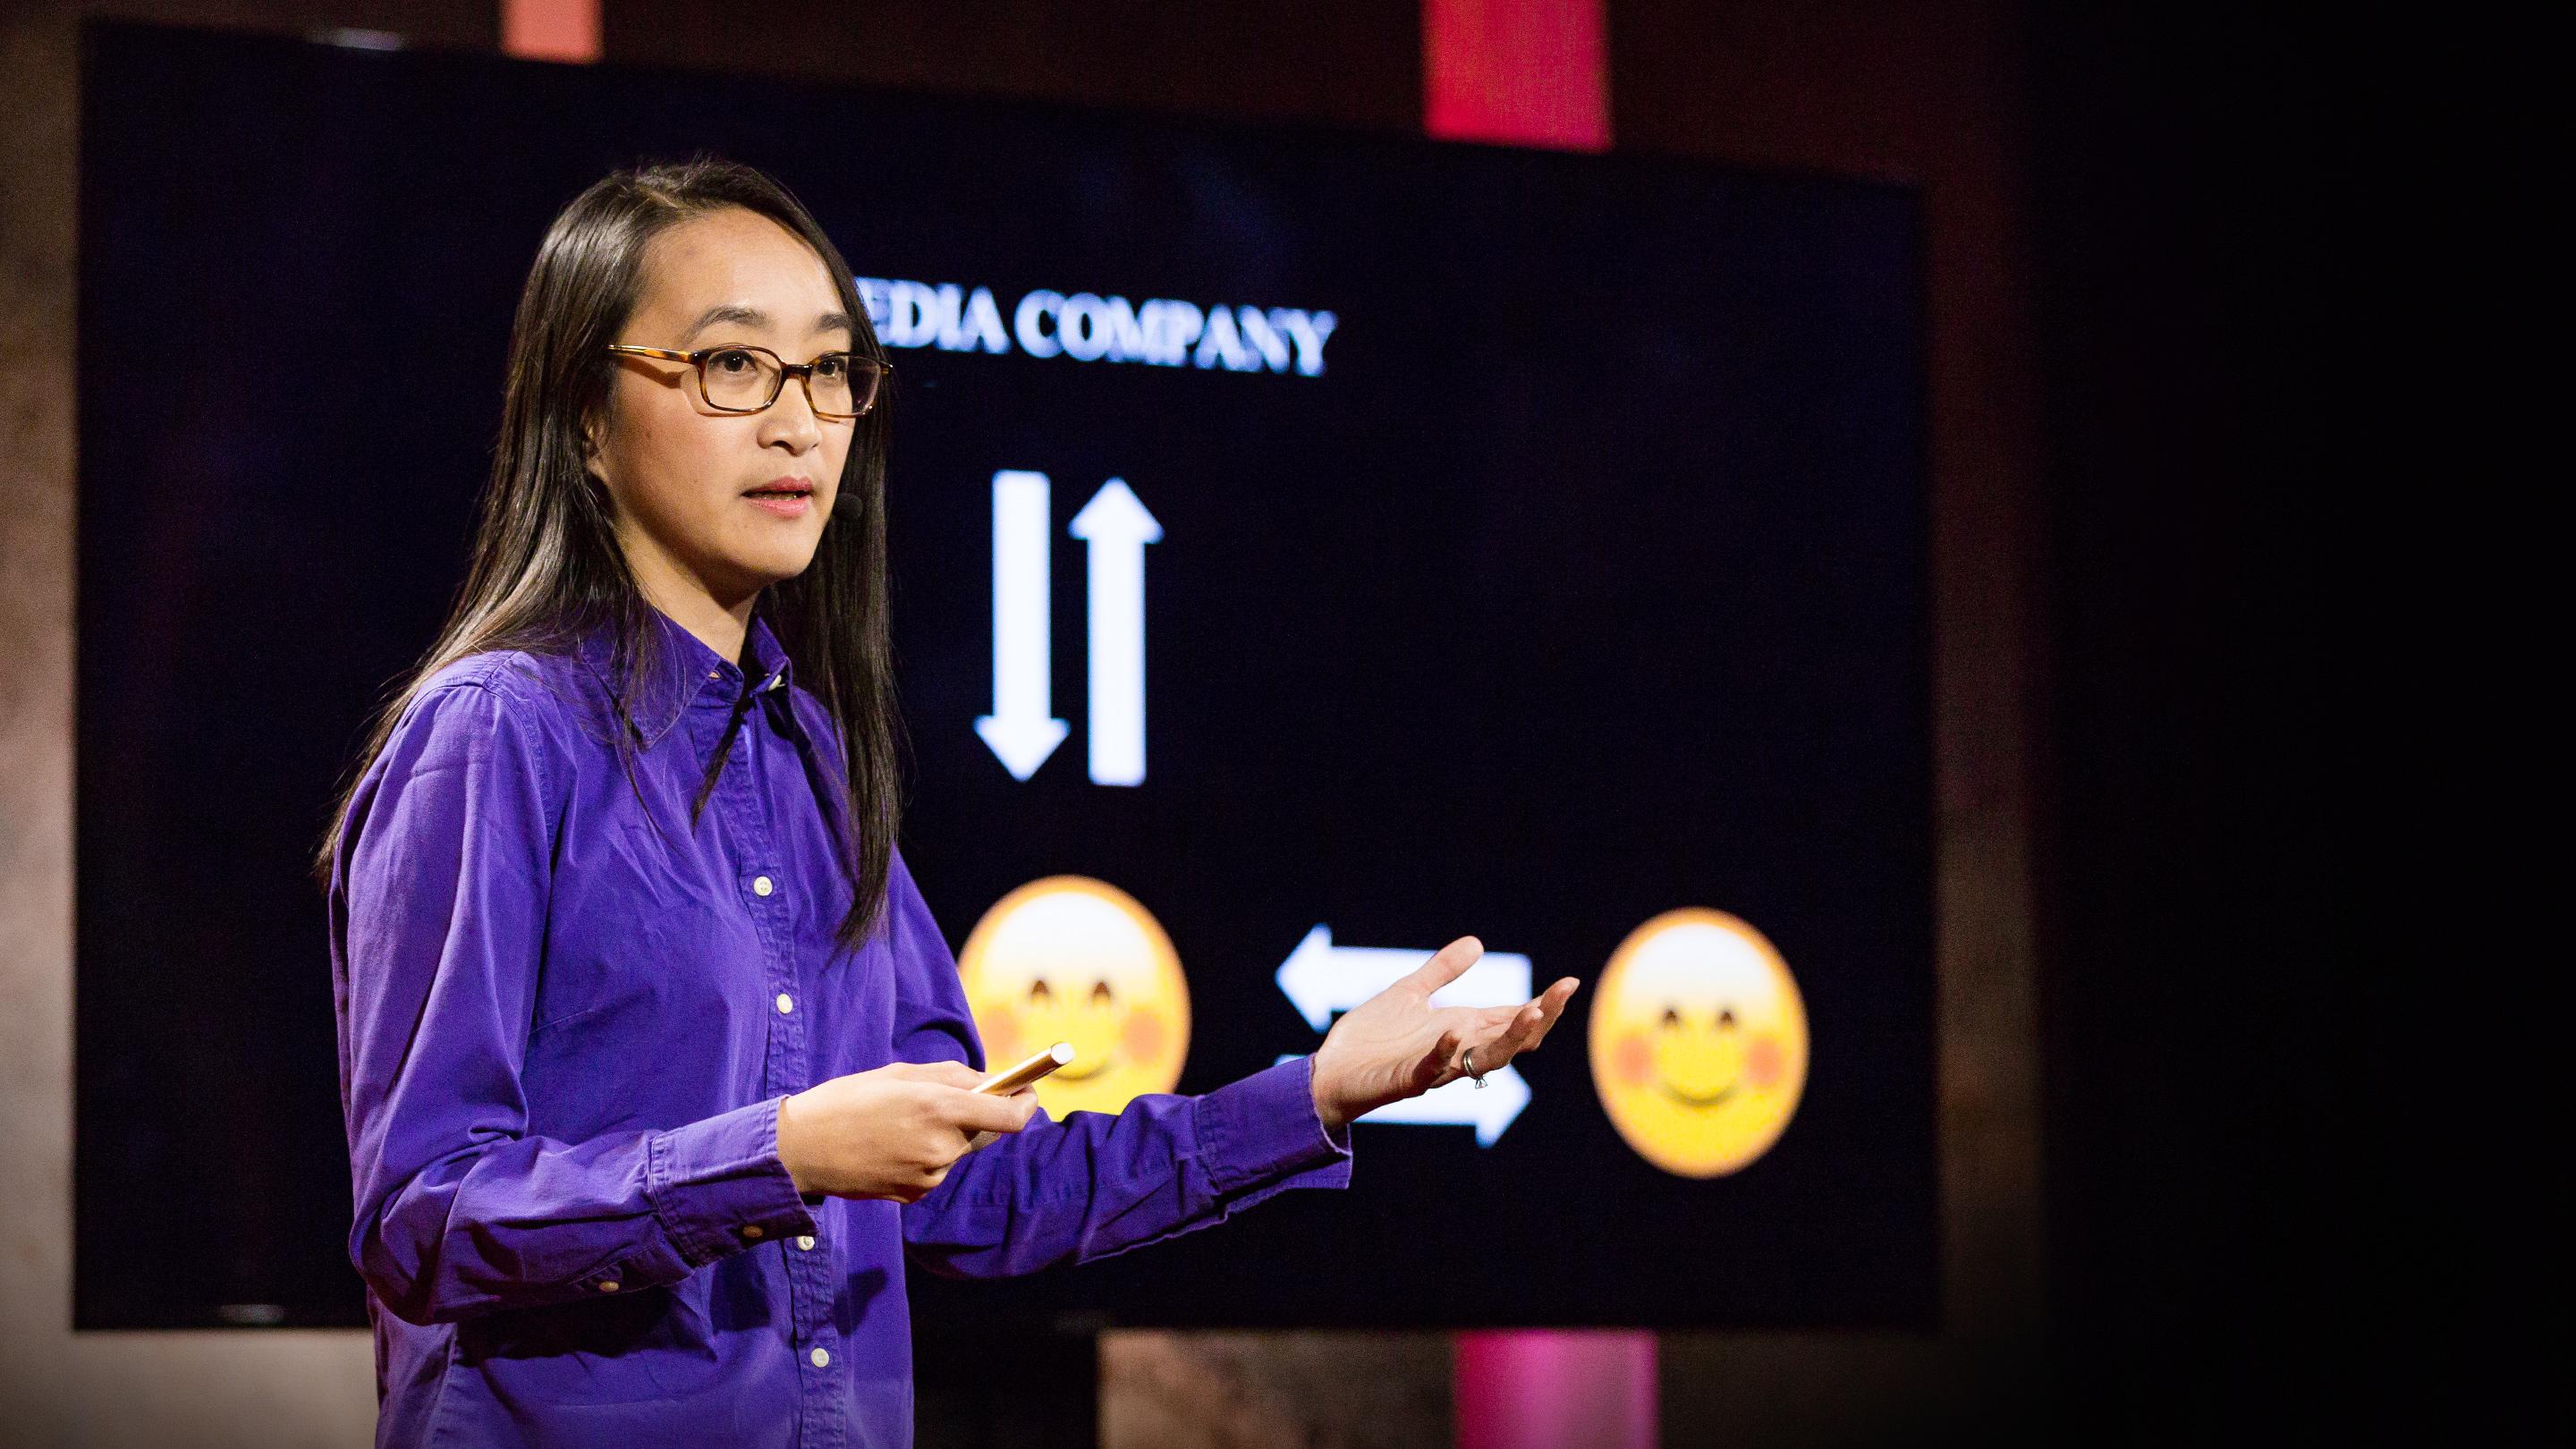 What makes something go viral? | Dao Nguyen